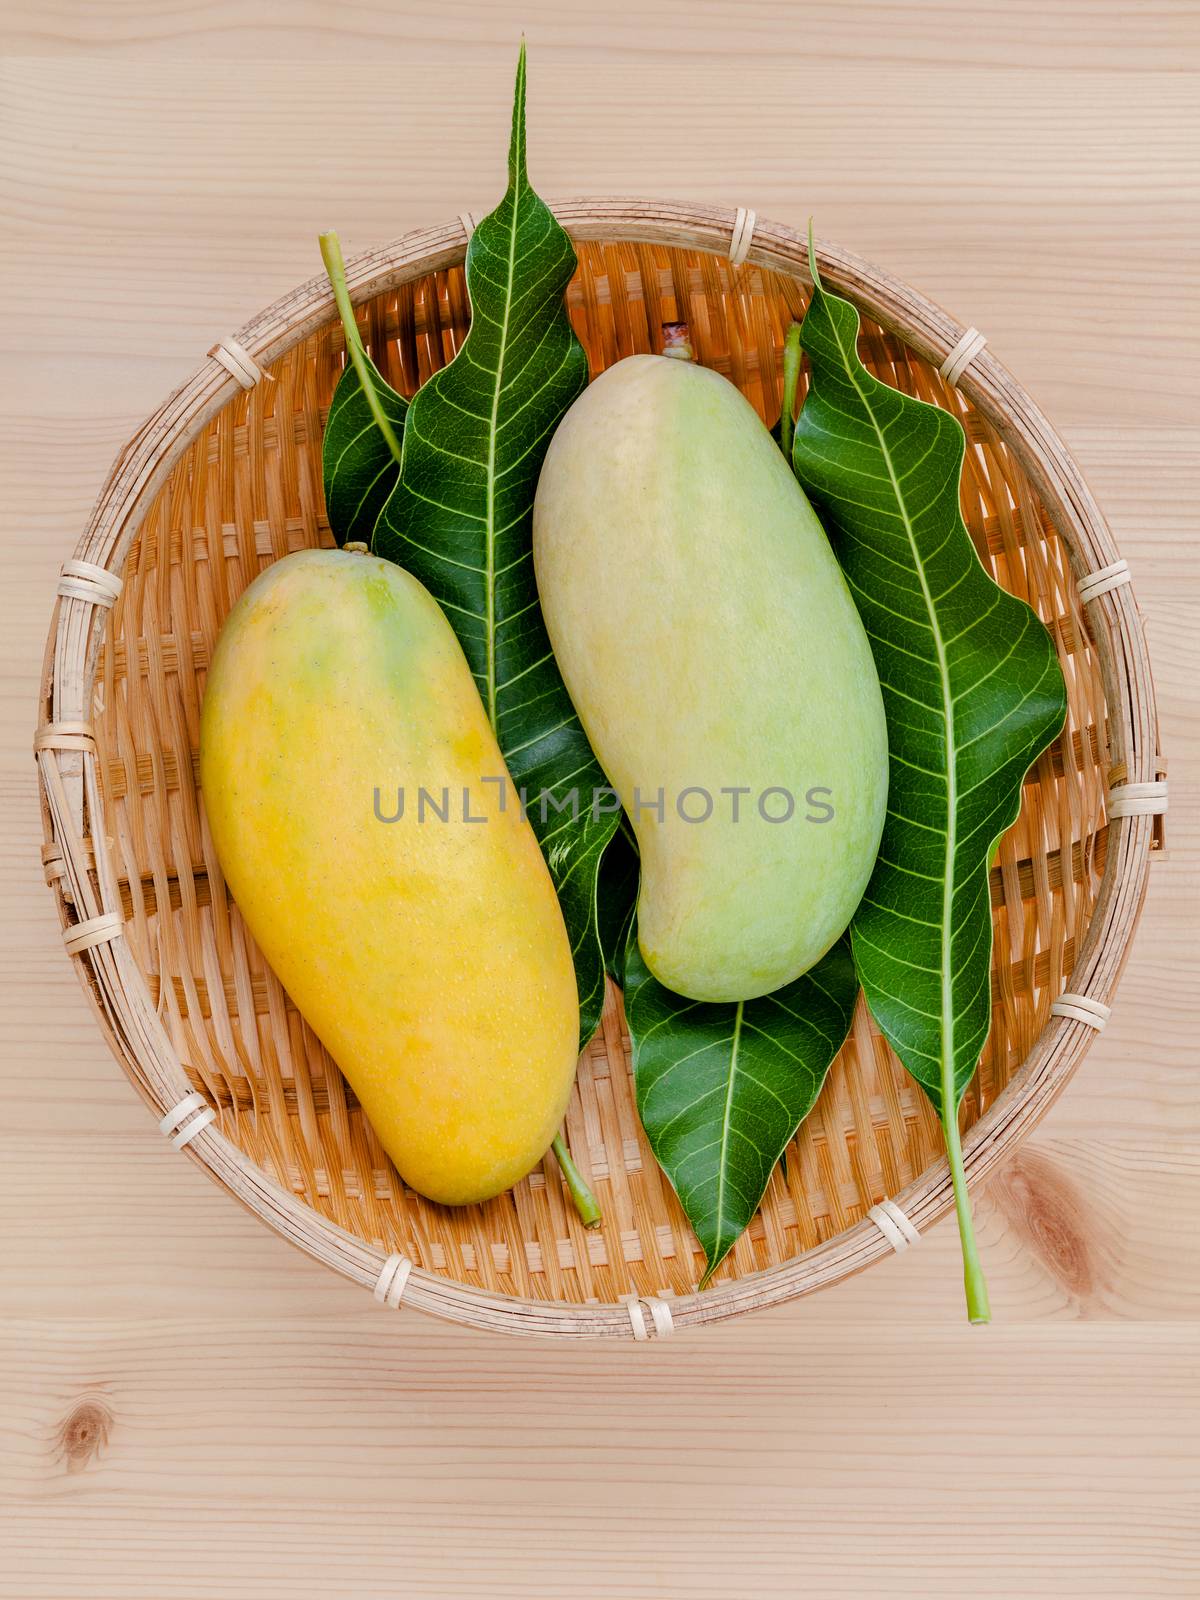 Fresh organic traditional thai mangoes high vitamins and minerals set up on wooden table.